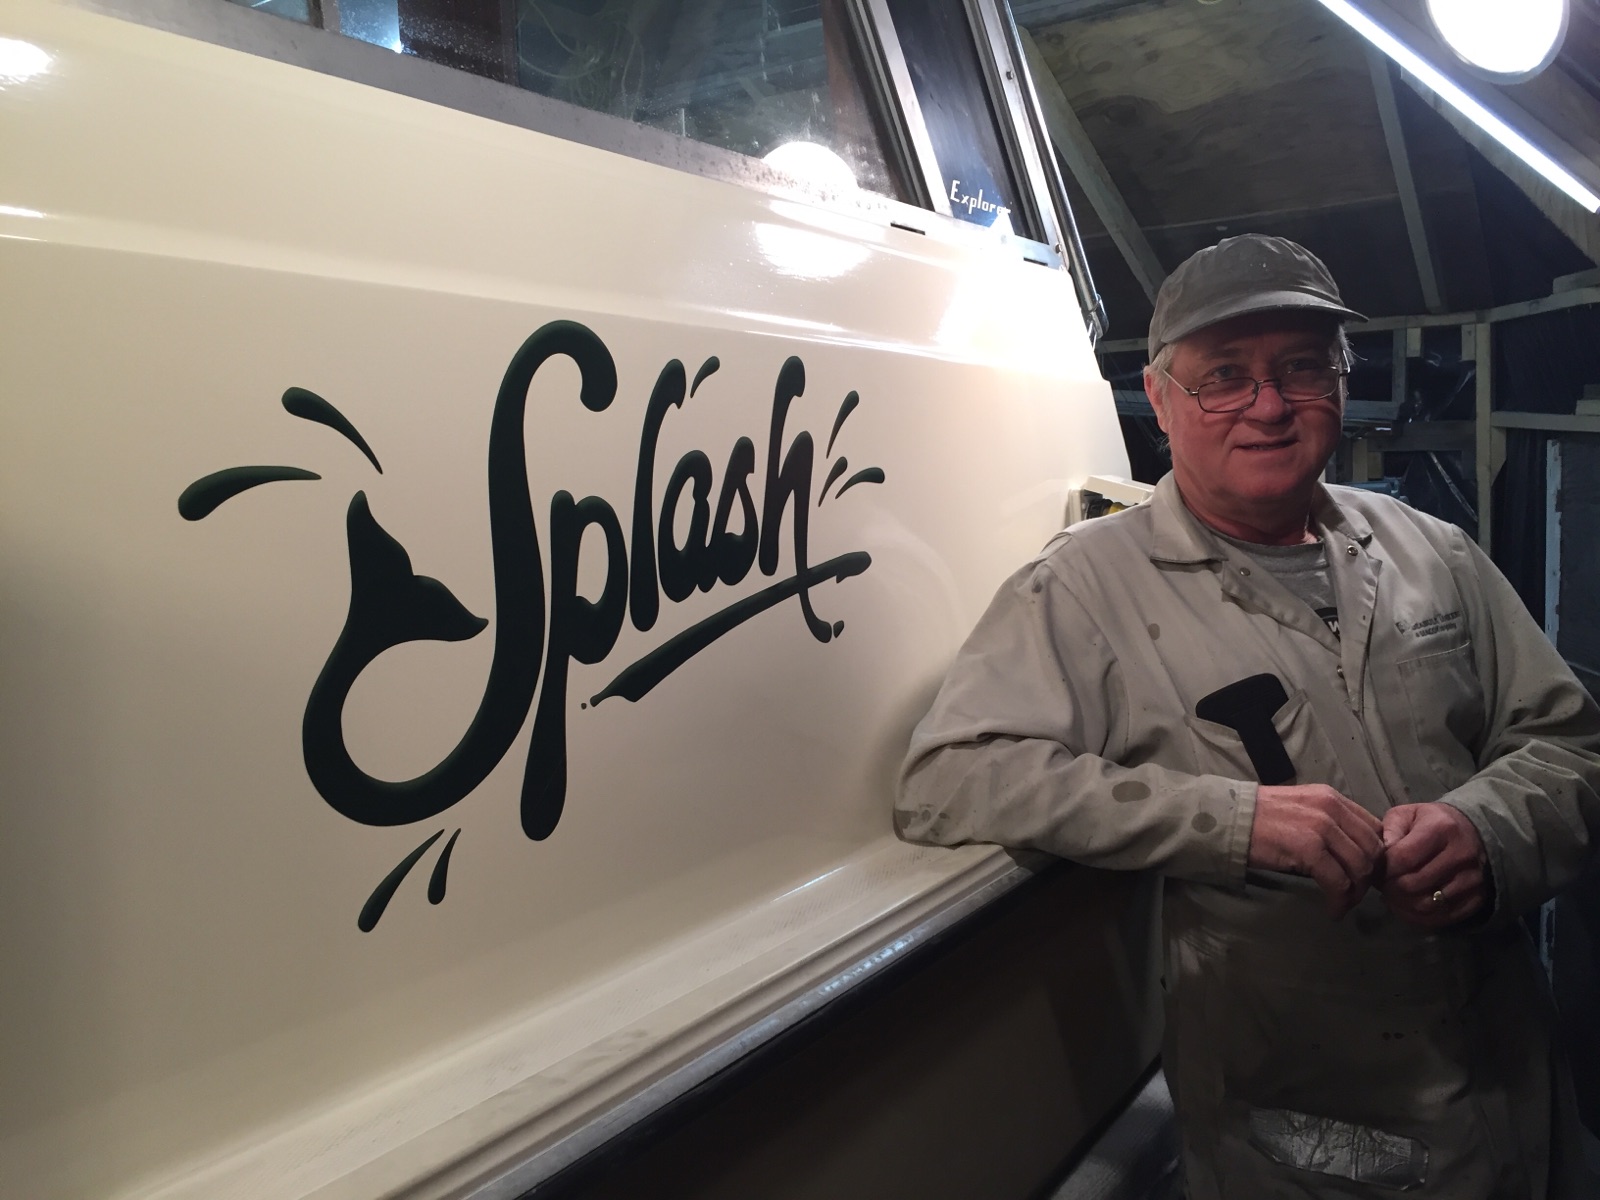 [Photo: Dad with Splash graphic on his boat]